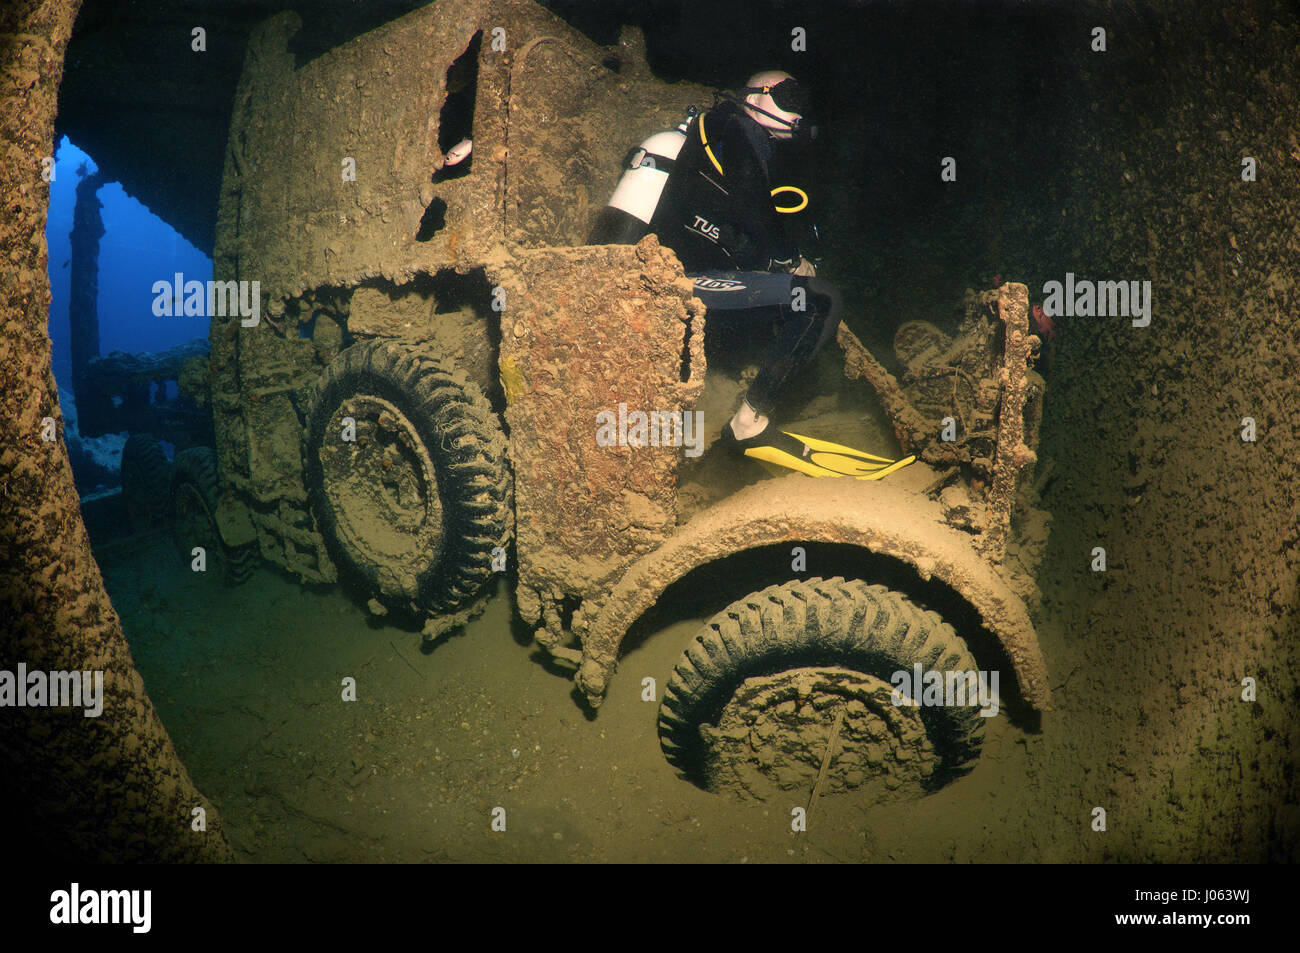 One diver sits on a truck recreating what might have been. EERIE underwater pictures show inside the wreckage of the sunken British World War Two ship SS Thistlegorm on the seventy-fifth anniversary of her sinking. The series of images show the rusted remains of the merchant navy ship’s cargo which includes motorbikes, army trucks and an aircraft propeller. Other pictures show how sea life have been inhabiting the wreckage. Stock Photo